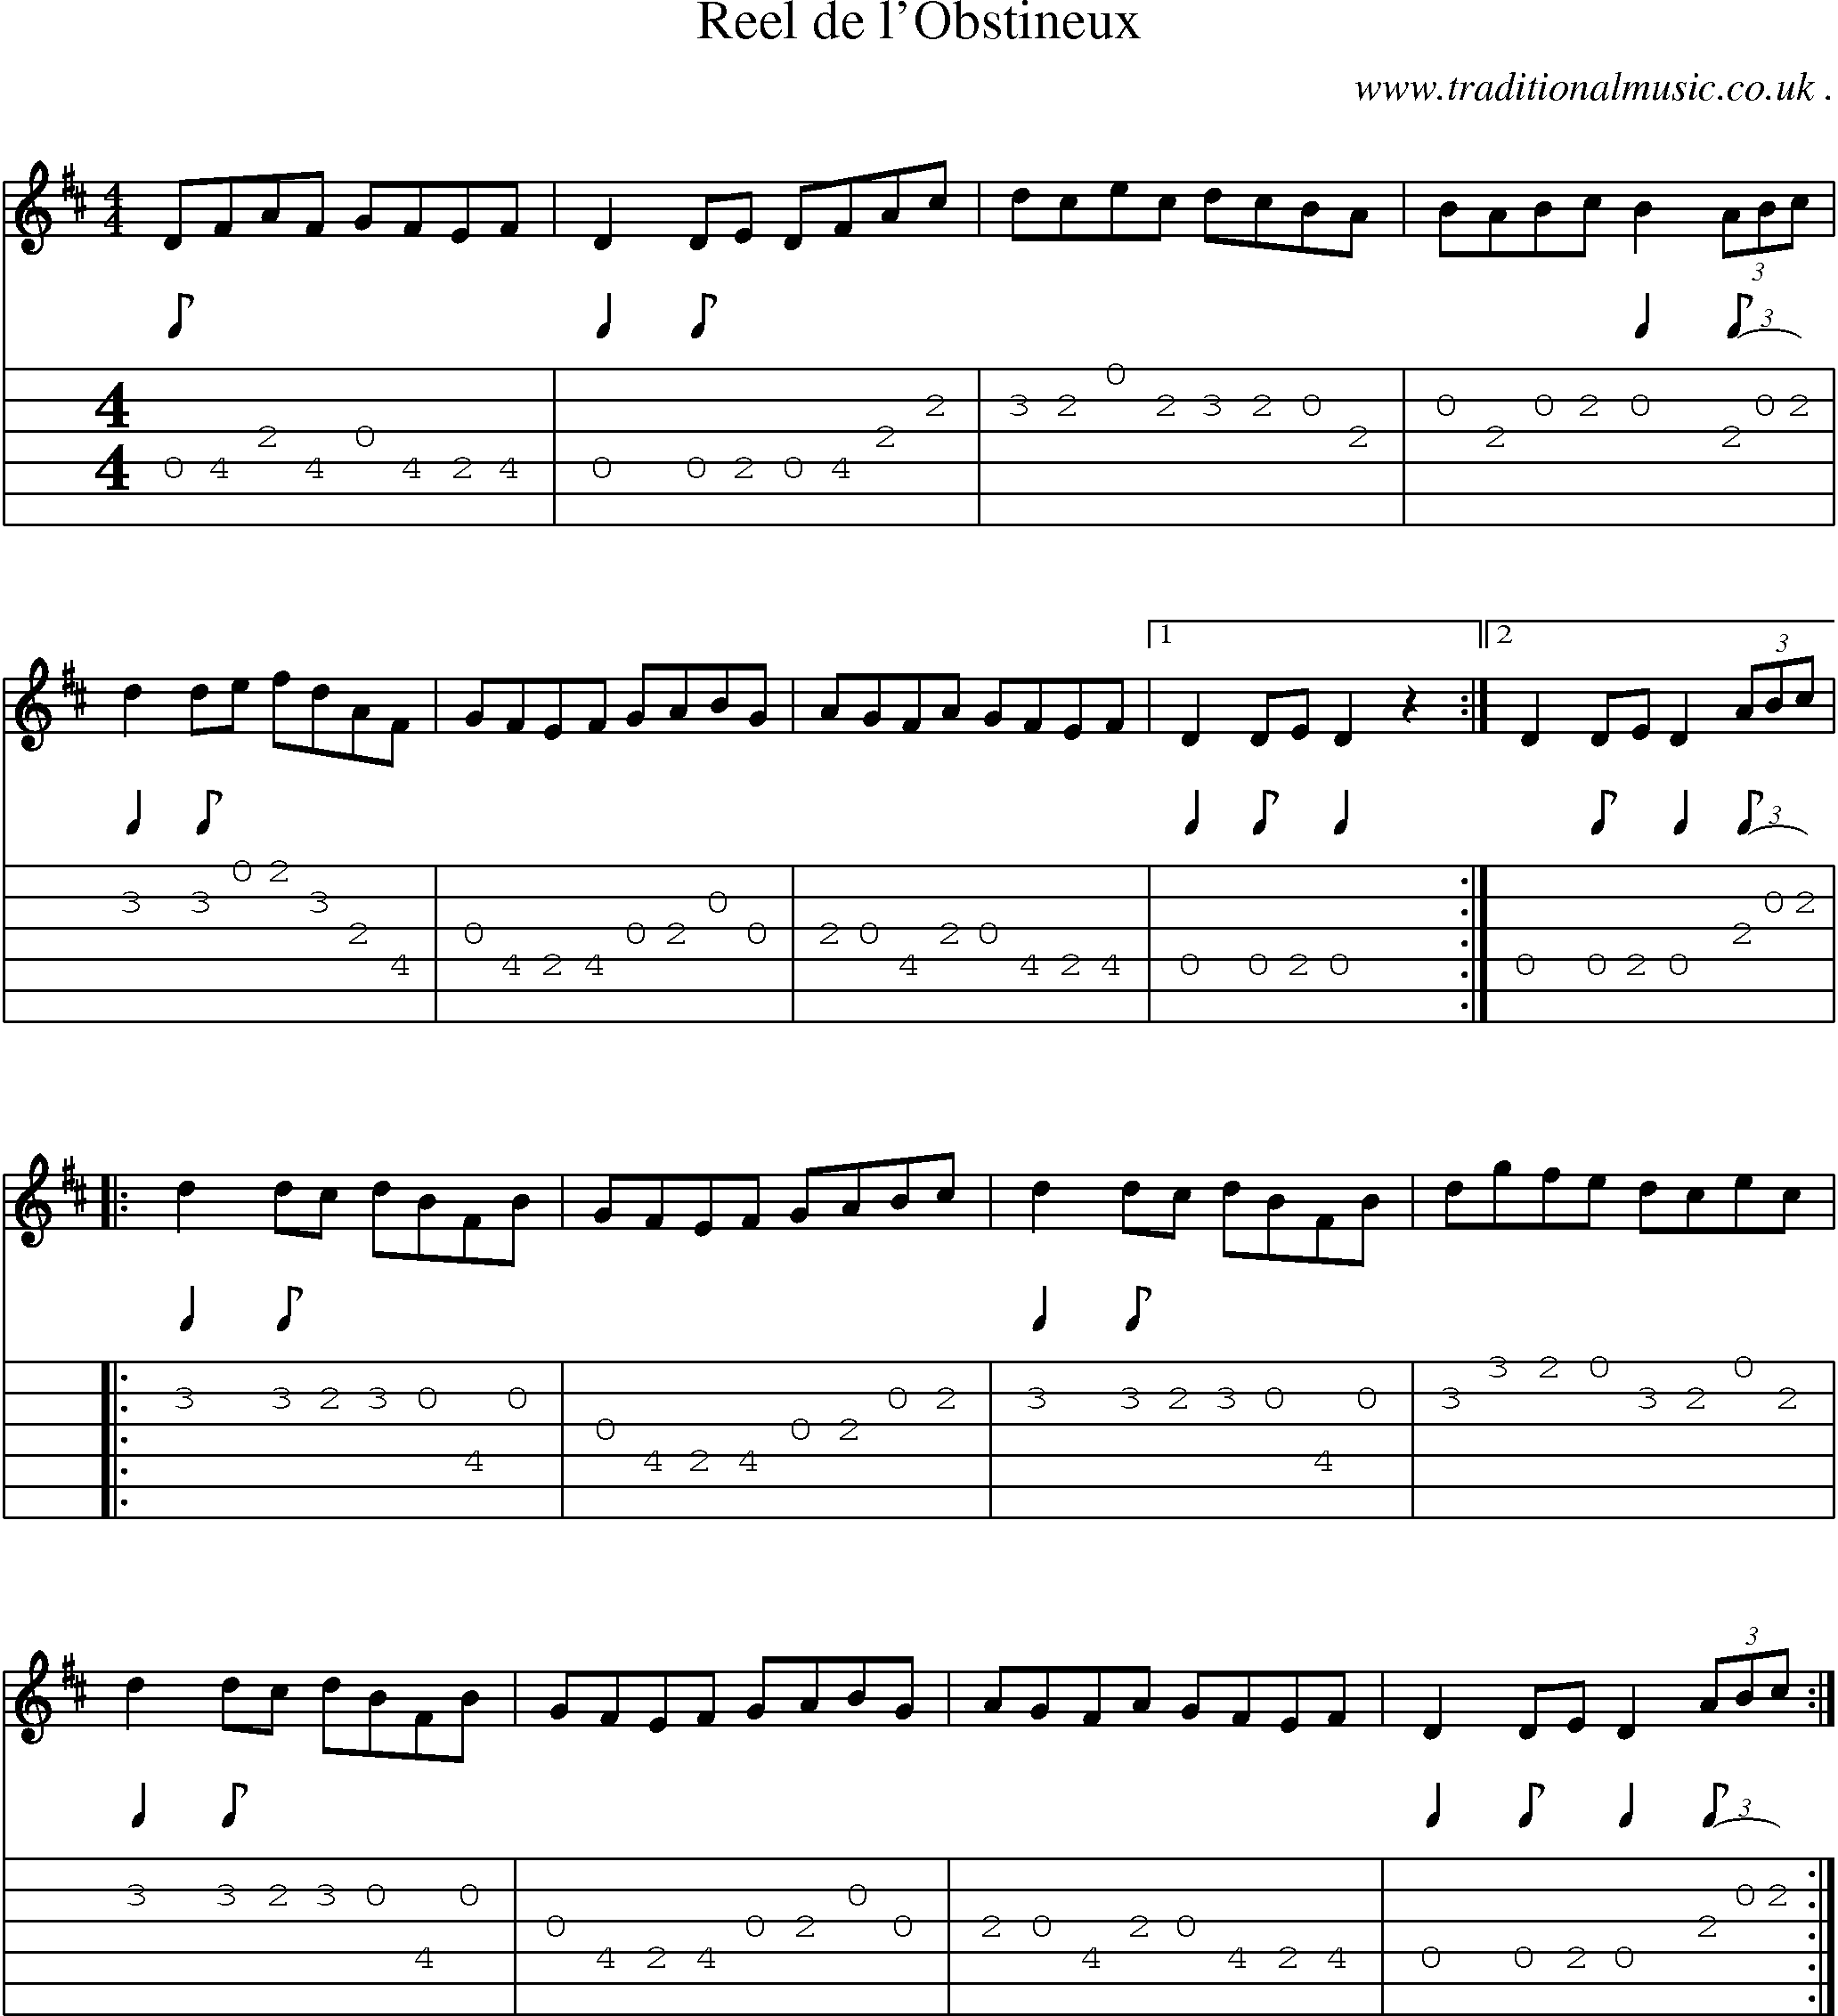 Sheet-Music and Guitar Tabs for Reel De Lobstineux